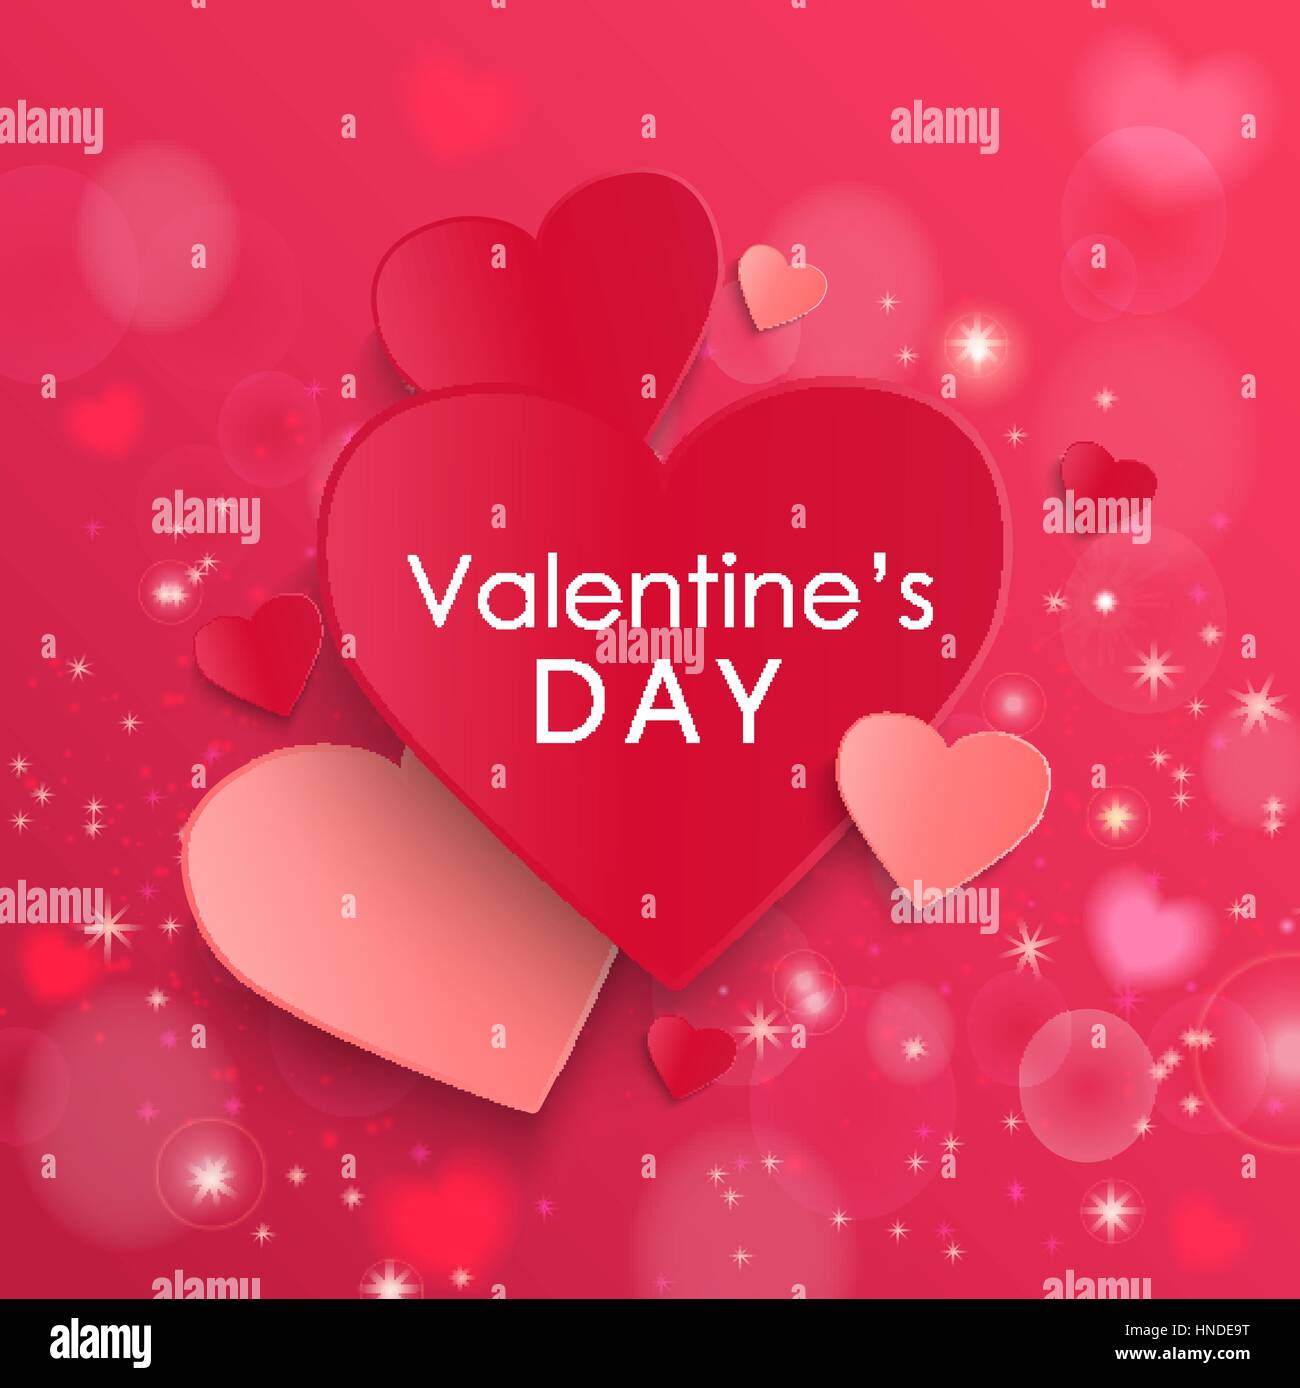 Happy Valentines day and weeding design elements. Pink abstract background with hearts. February 14. Vector illustration. Stock Vector